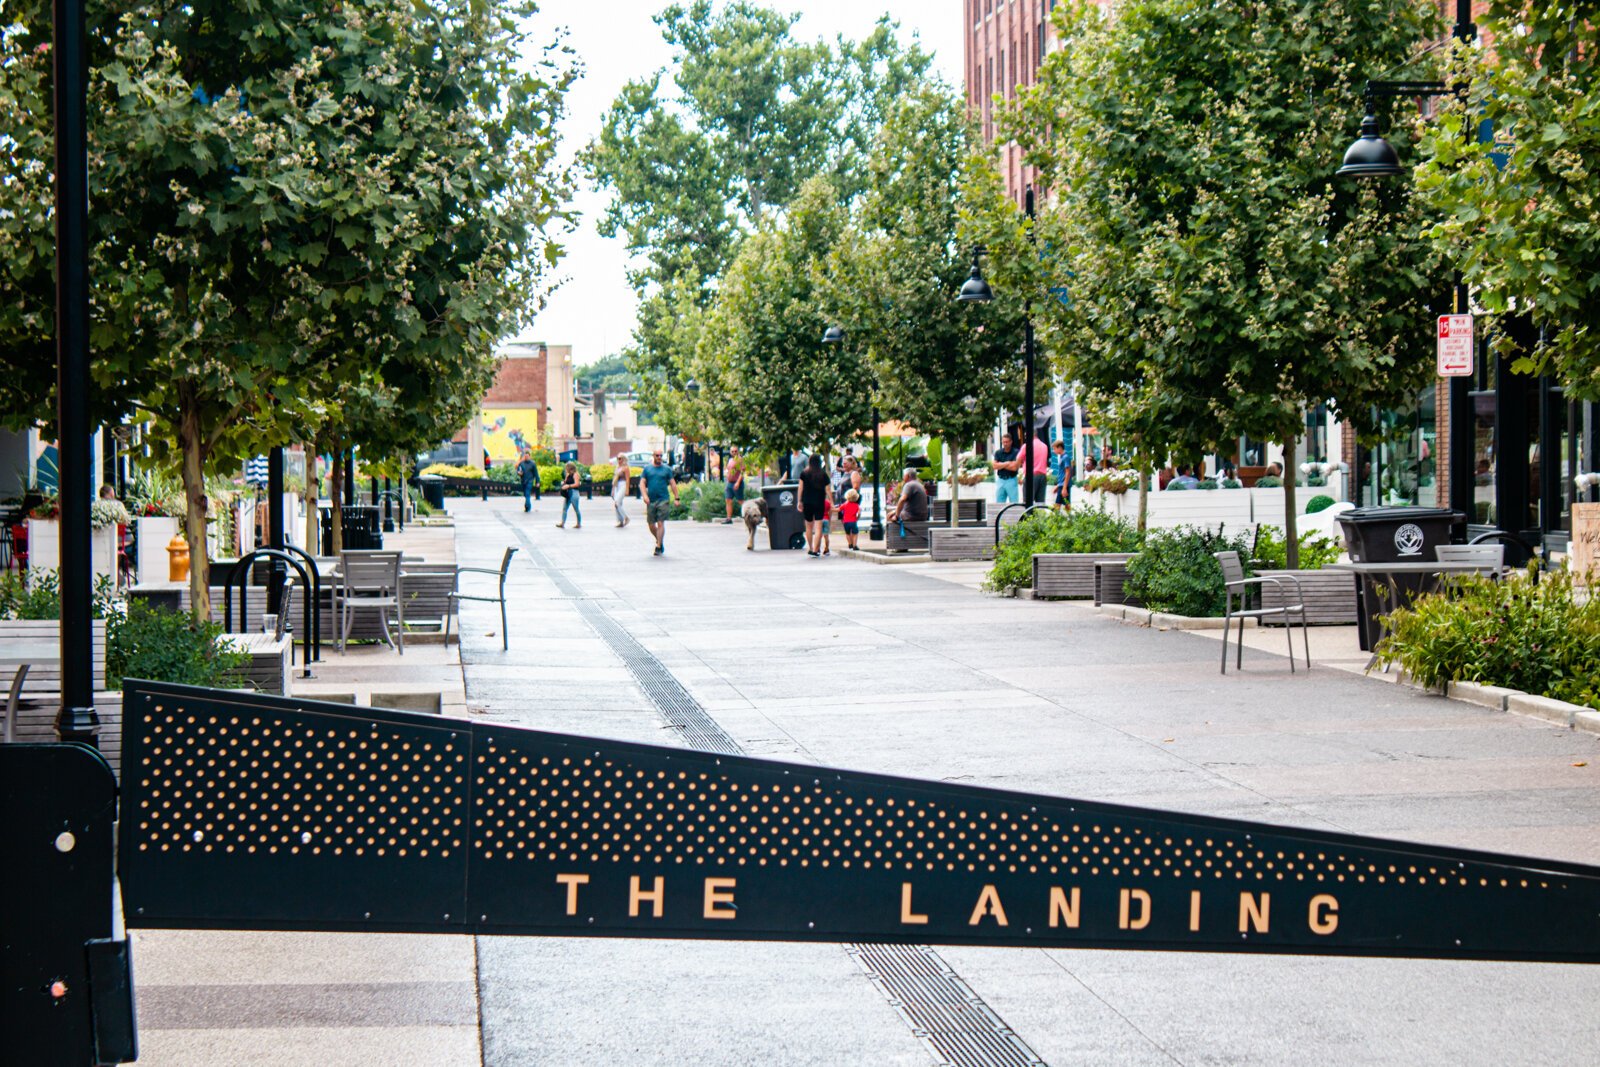 The Landing is one of Fort Wayne’s most iconic pedestrian-friendly blocks.